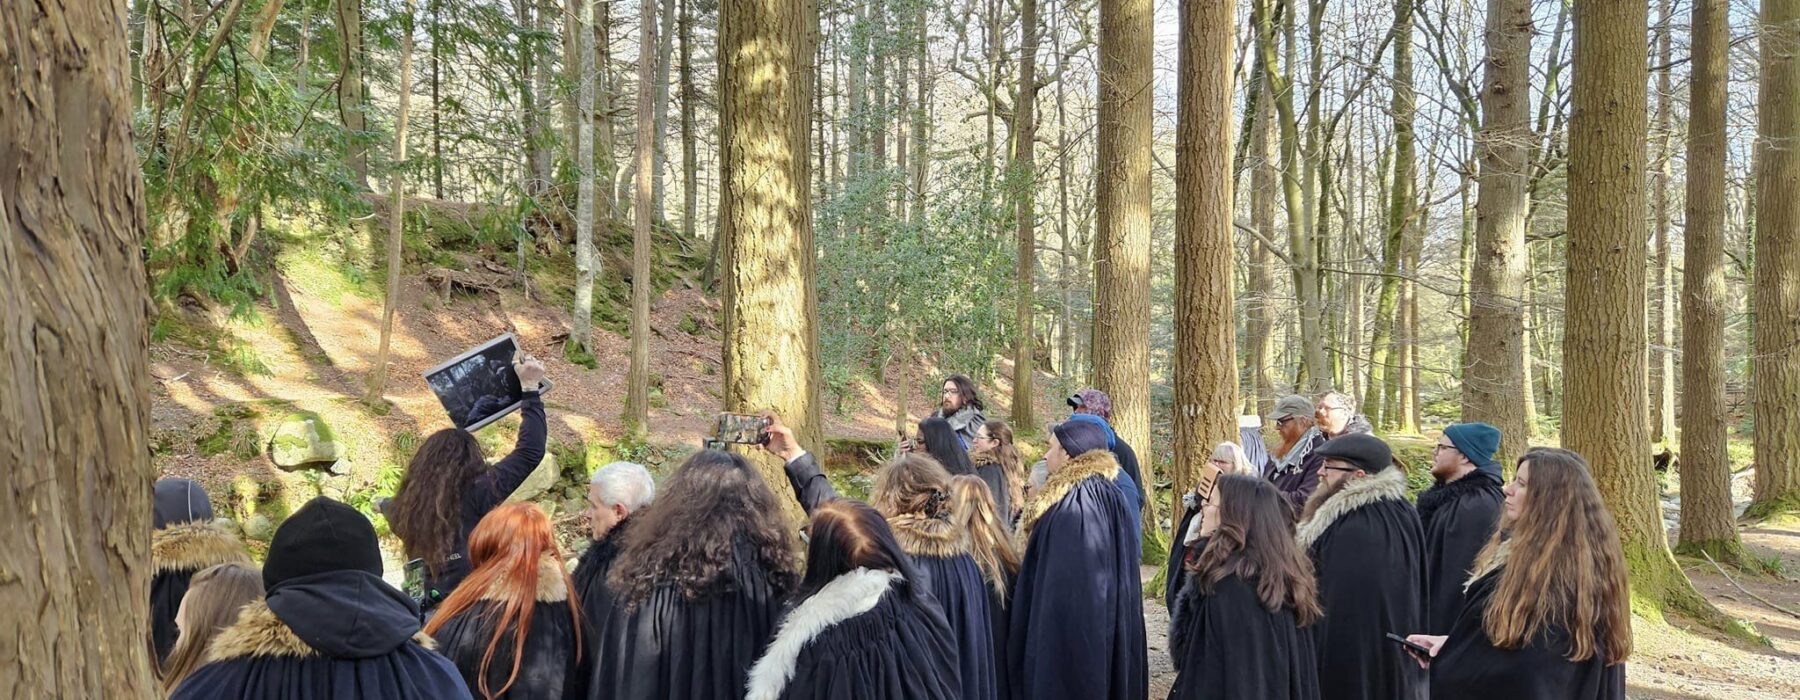 A tour group is guided through a wood wearing long black cloaks